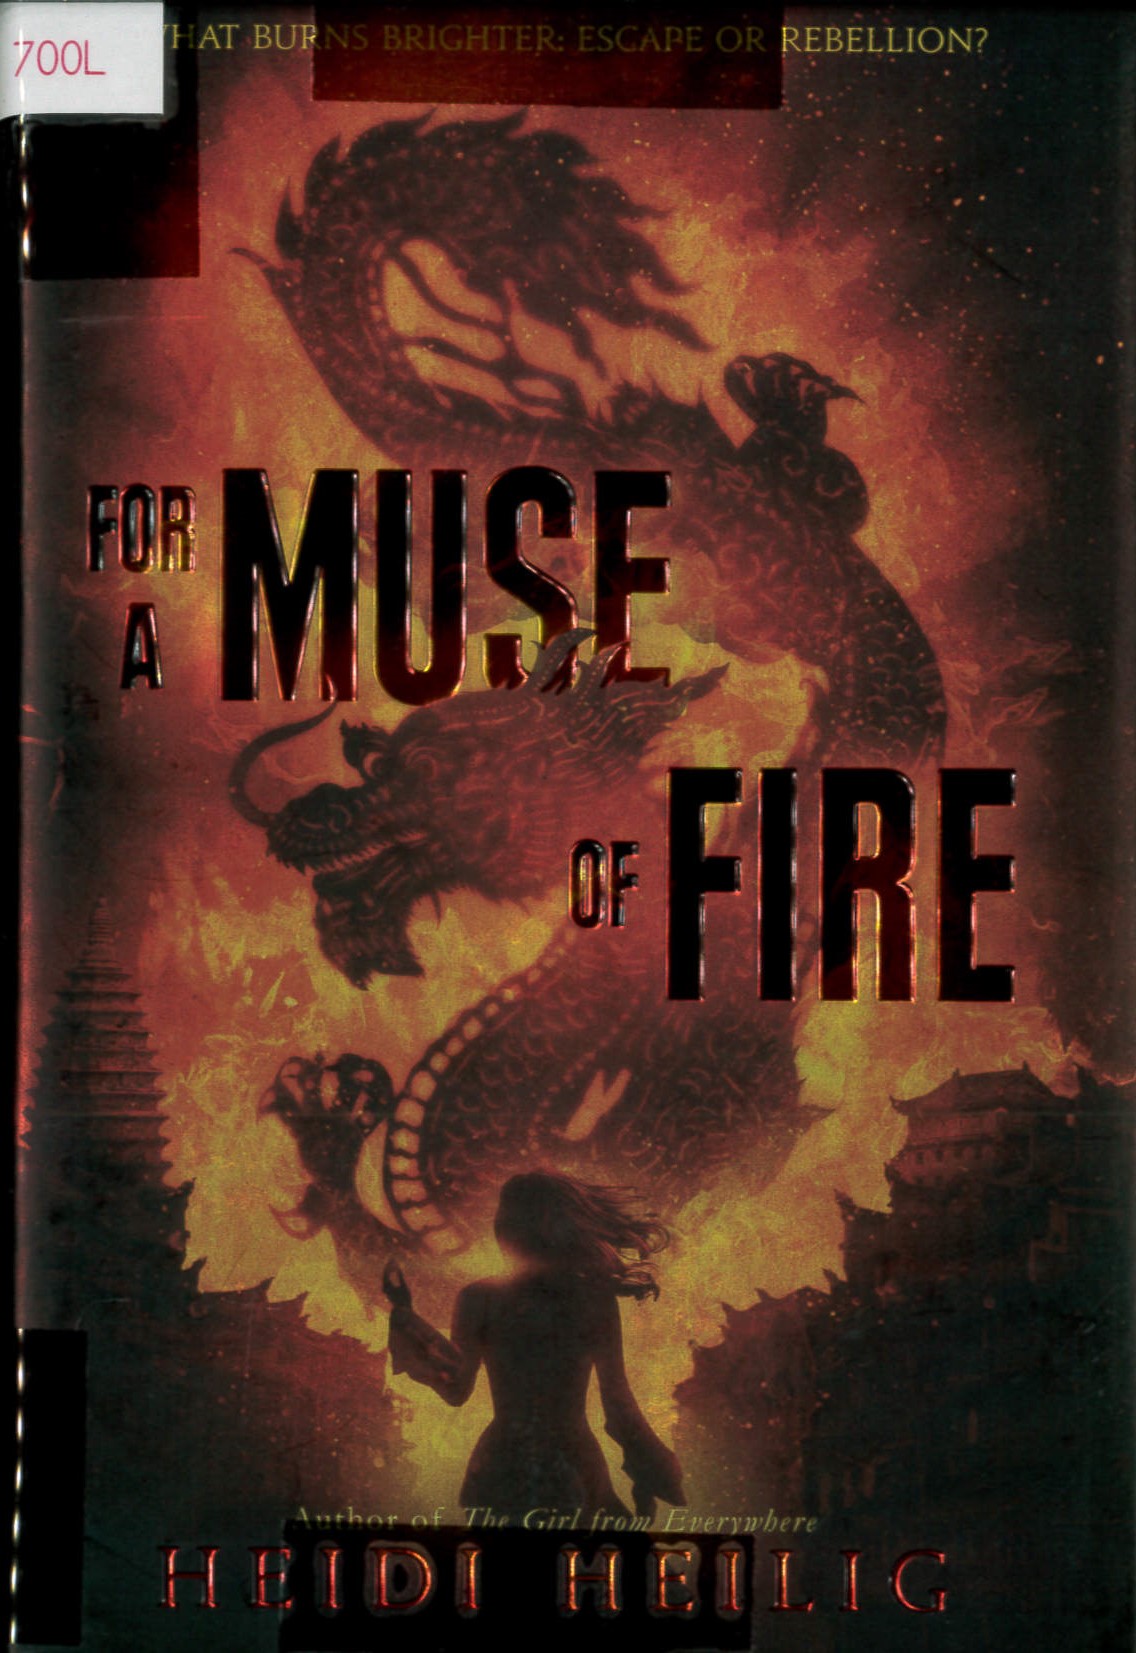 For a muse of fire /